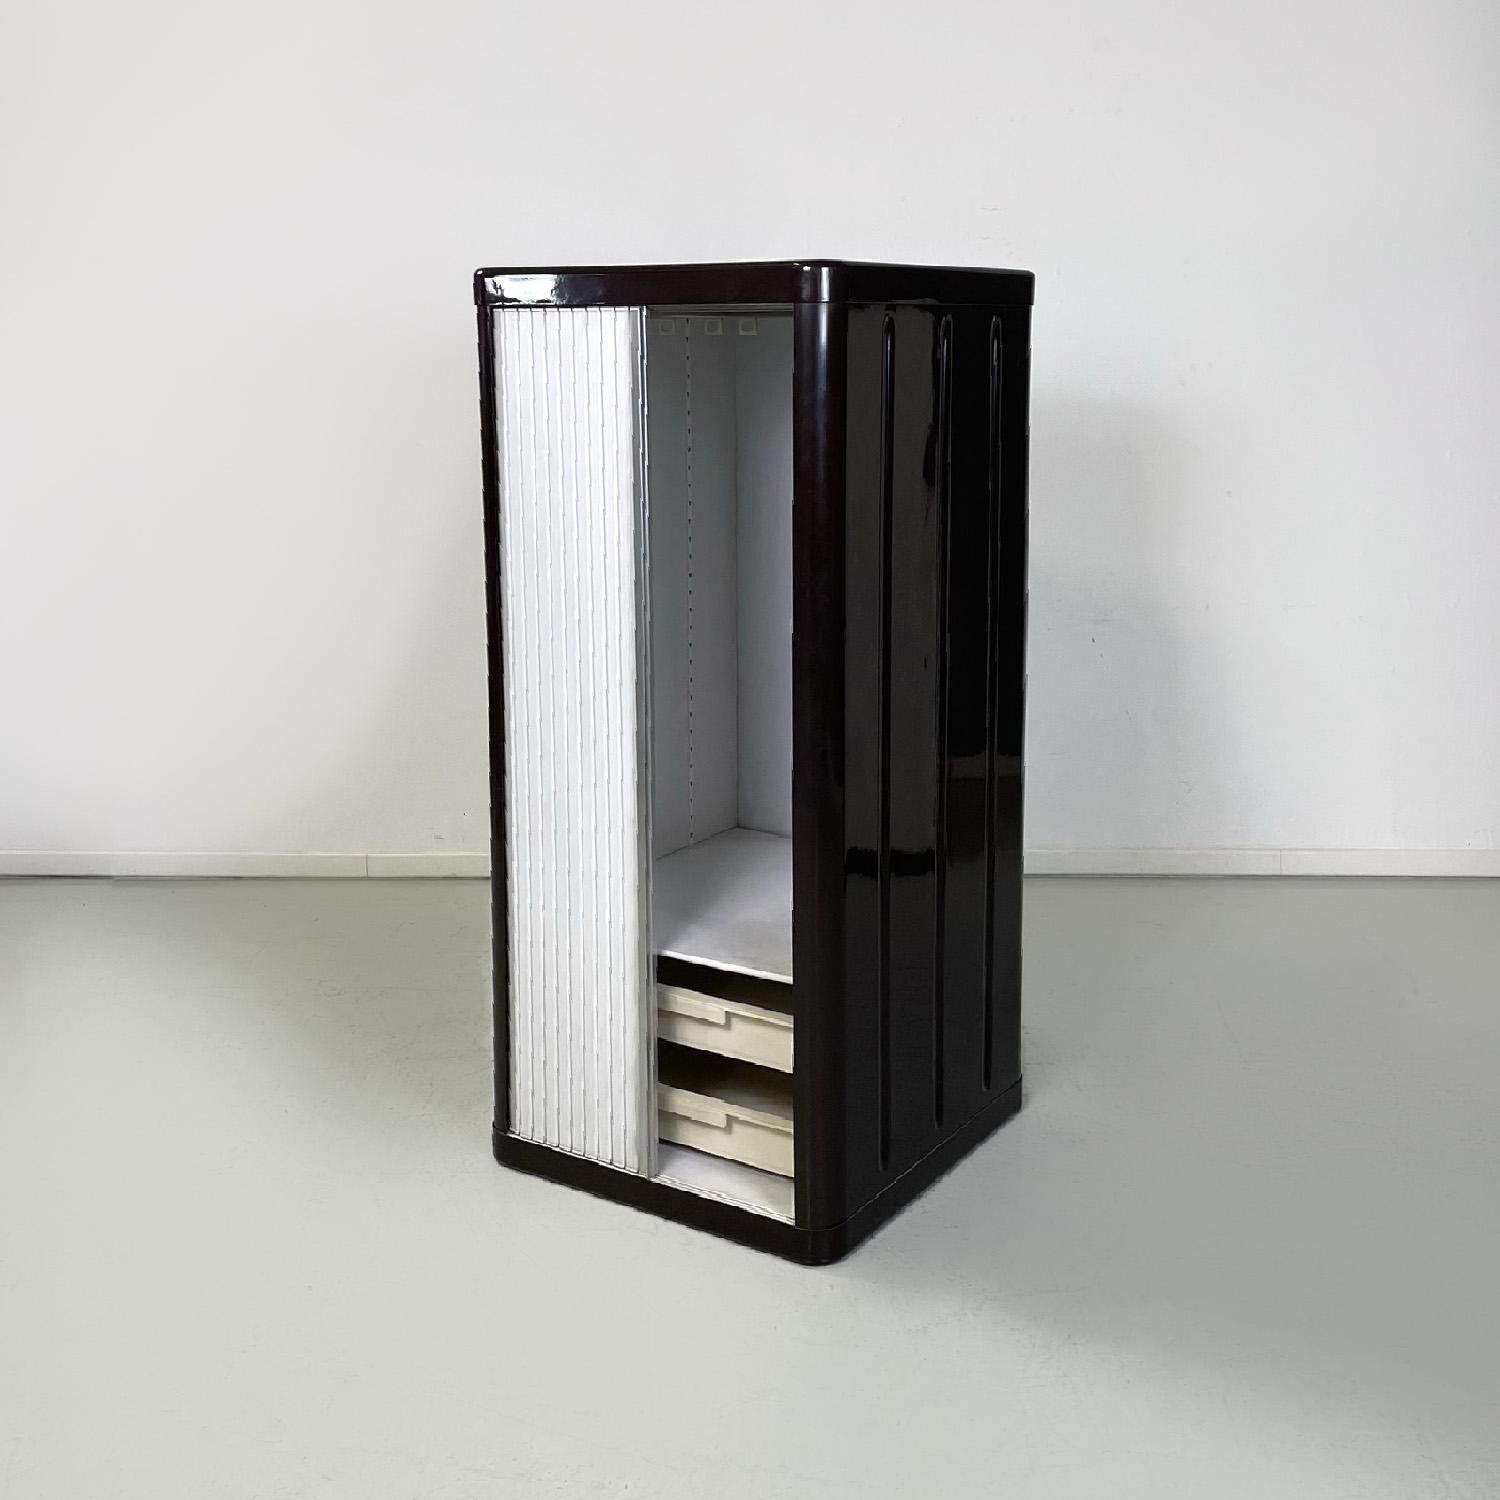 Italian mid-century modern wardrobe Pierluigi Molinari Asnaghi Box System, 1969
Square base cabinet. The structure is in ABS and fiberglass and is brown-purple in color, while the interior is white. It has a white plastic retractable sliding shutter